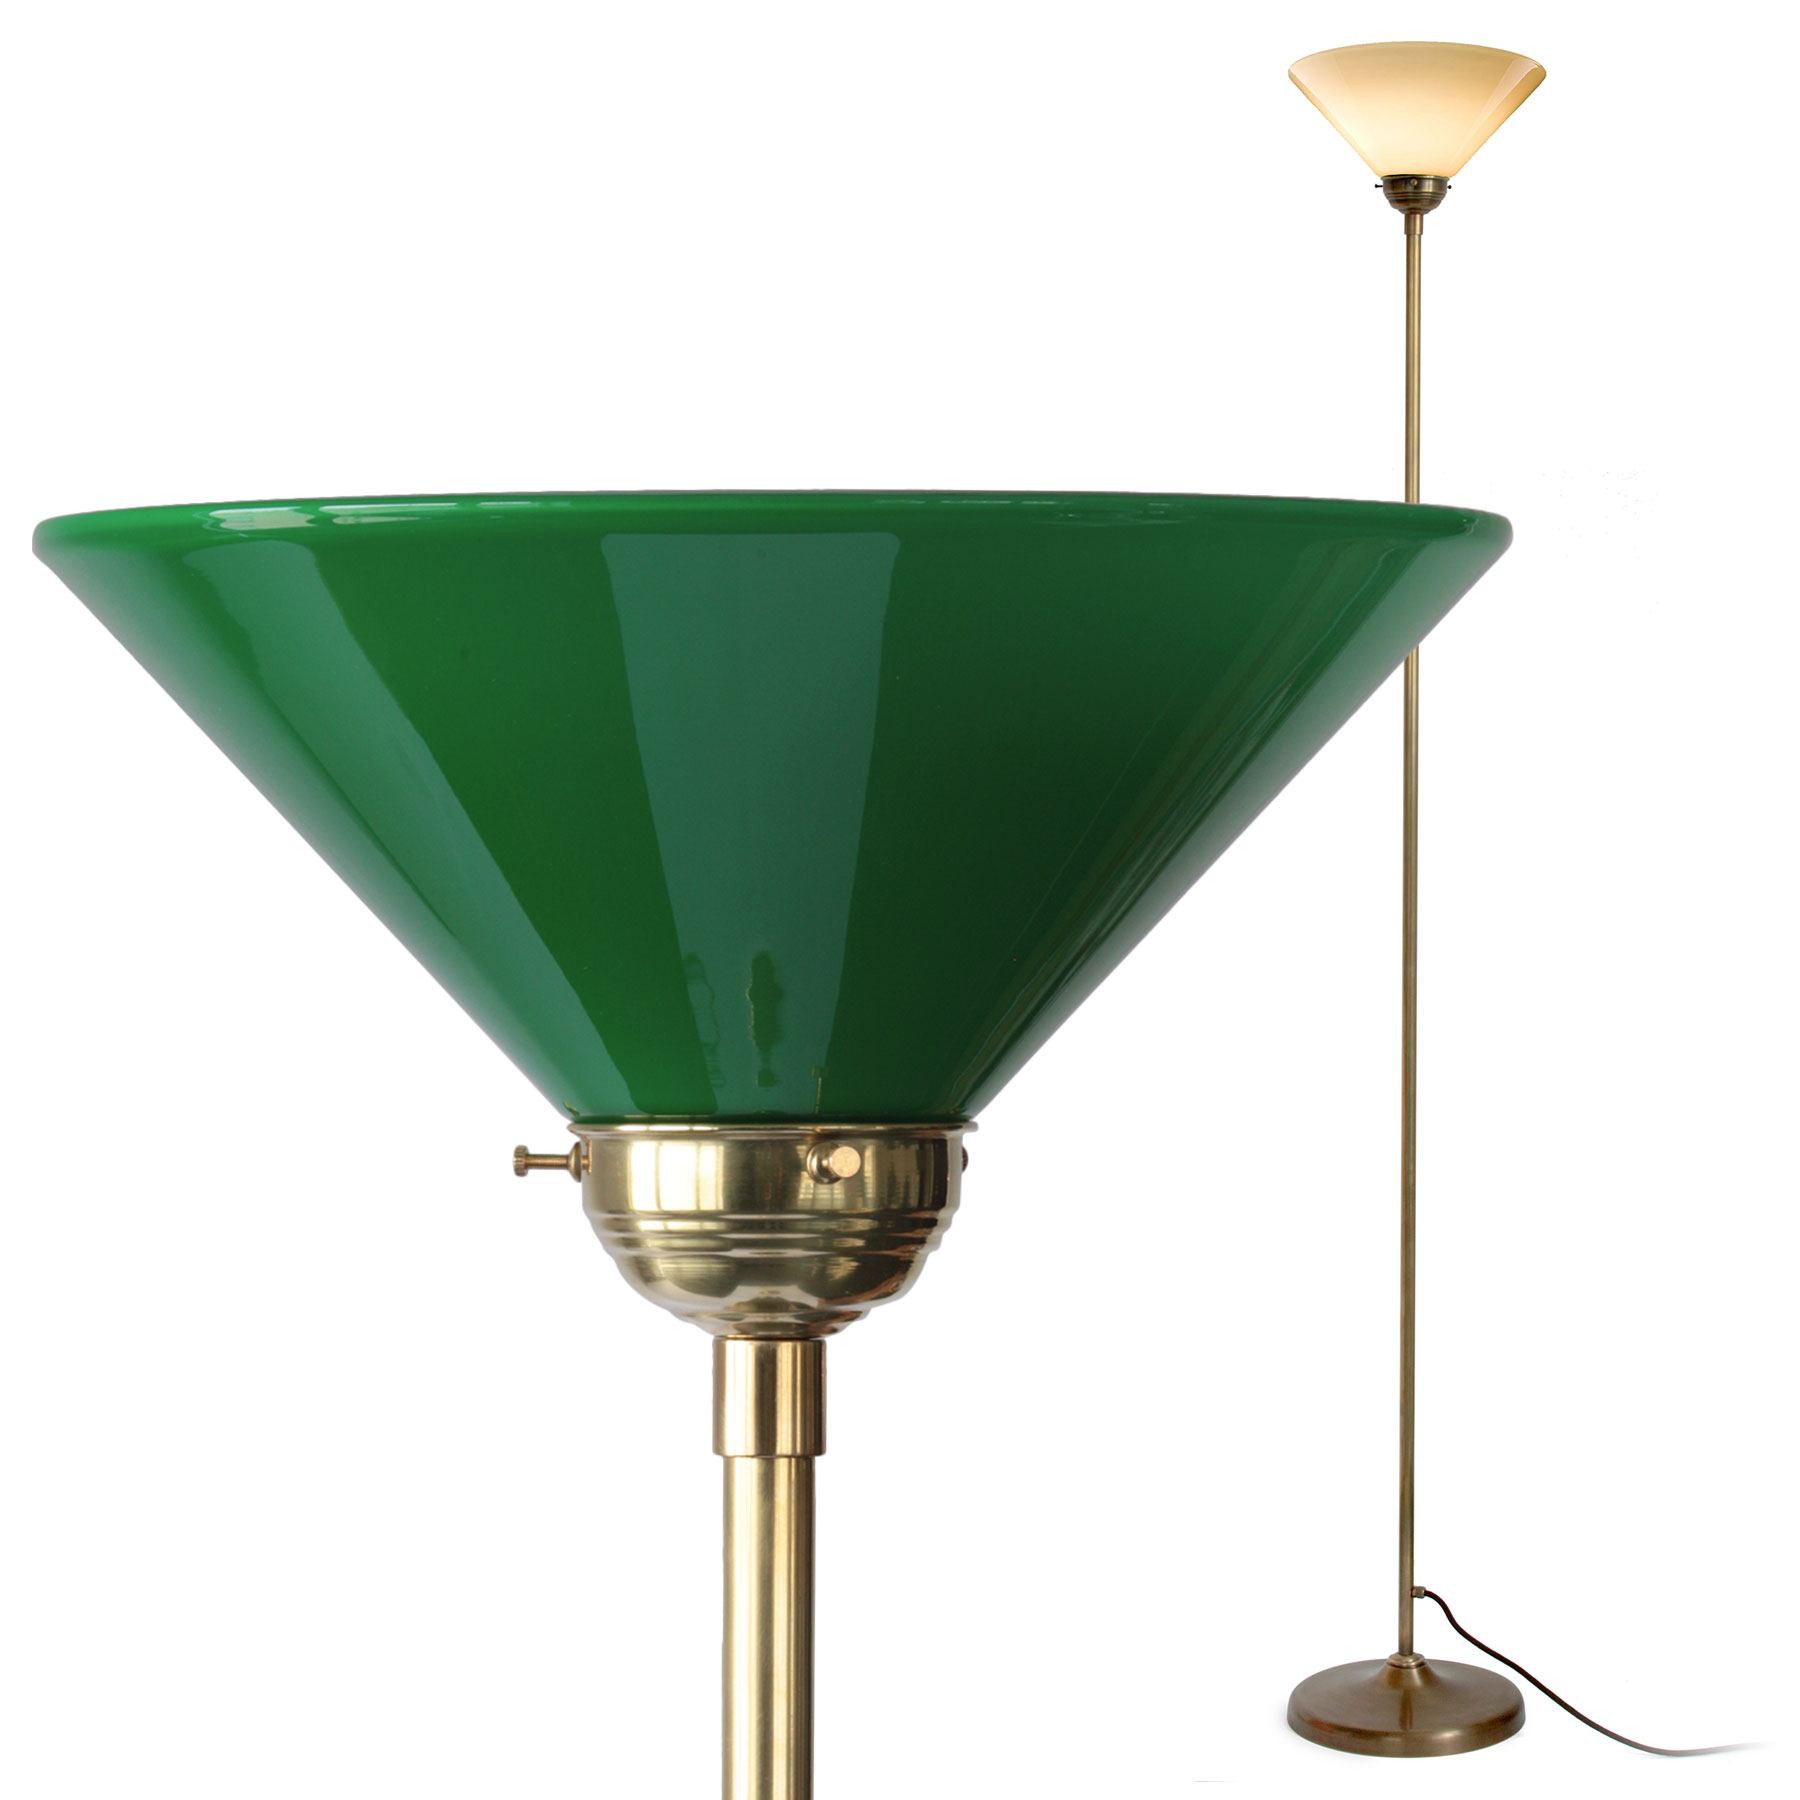 Art Nouveau Ceiling Floodlight with Cone Shaped Glass Shade